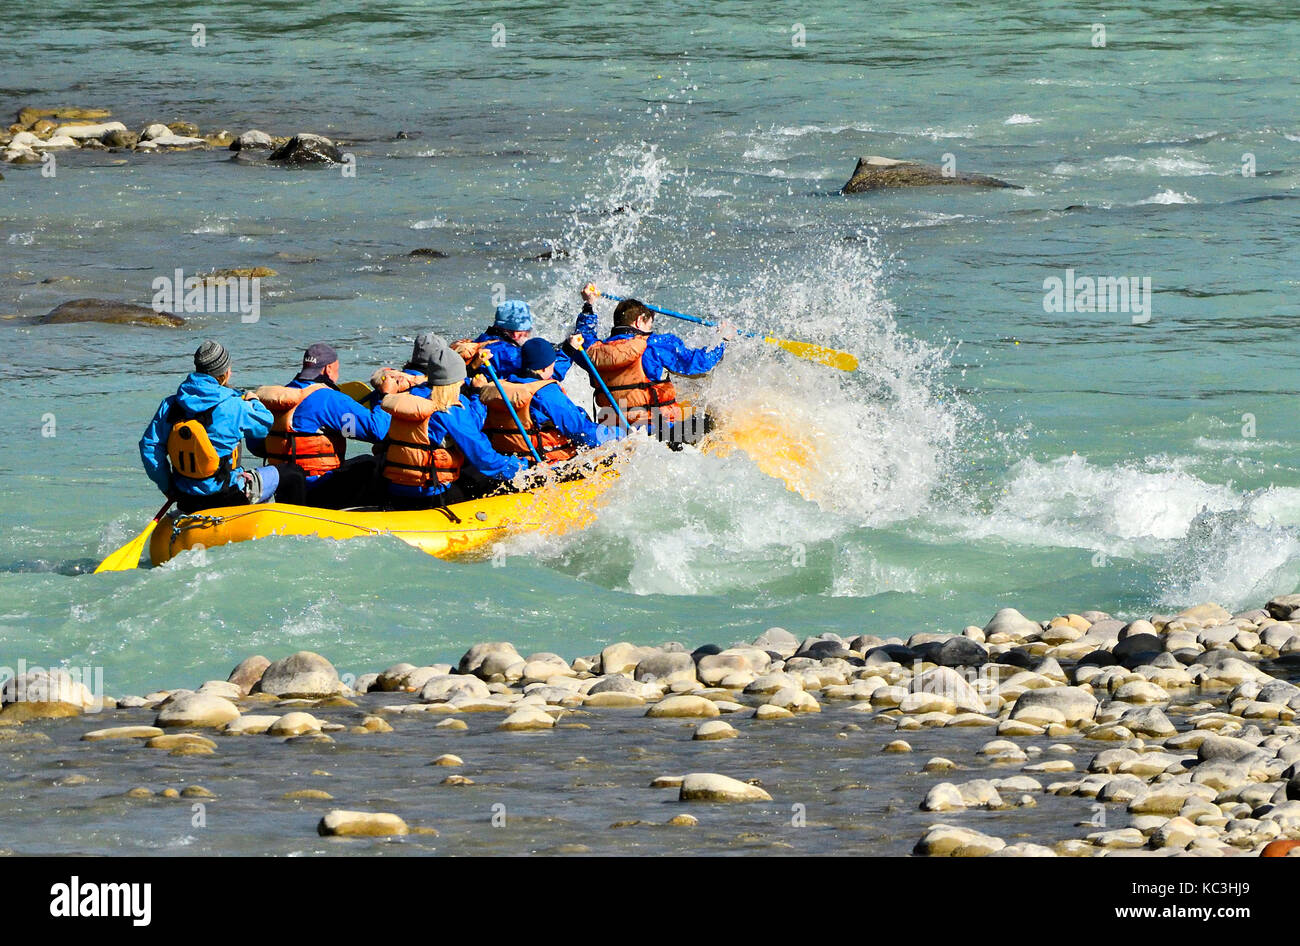 A group of tourists river rafting on the Athabasca River in Jasper National Park, Alberta Canada. Stock Photo